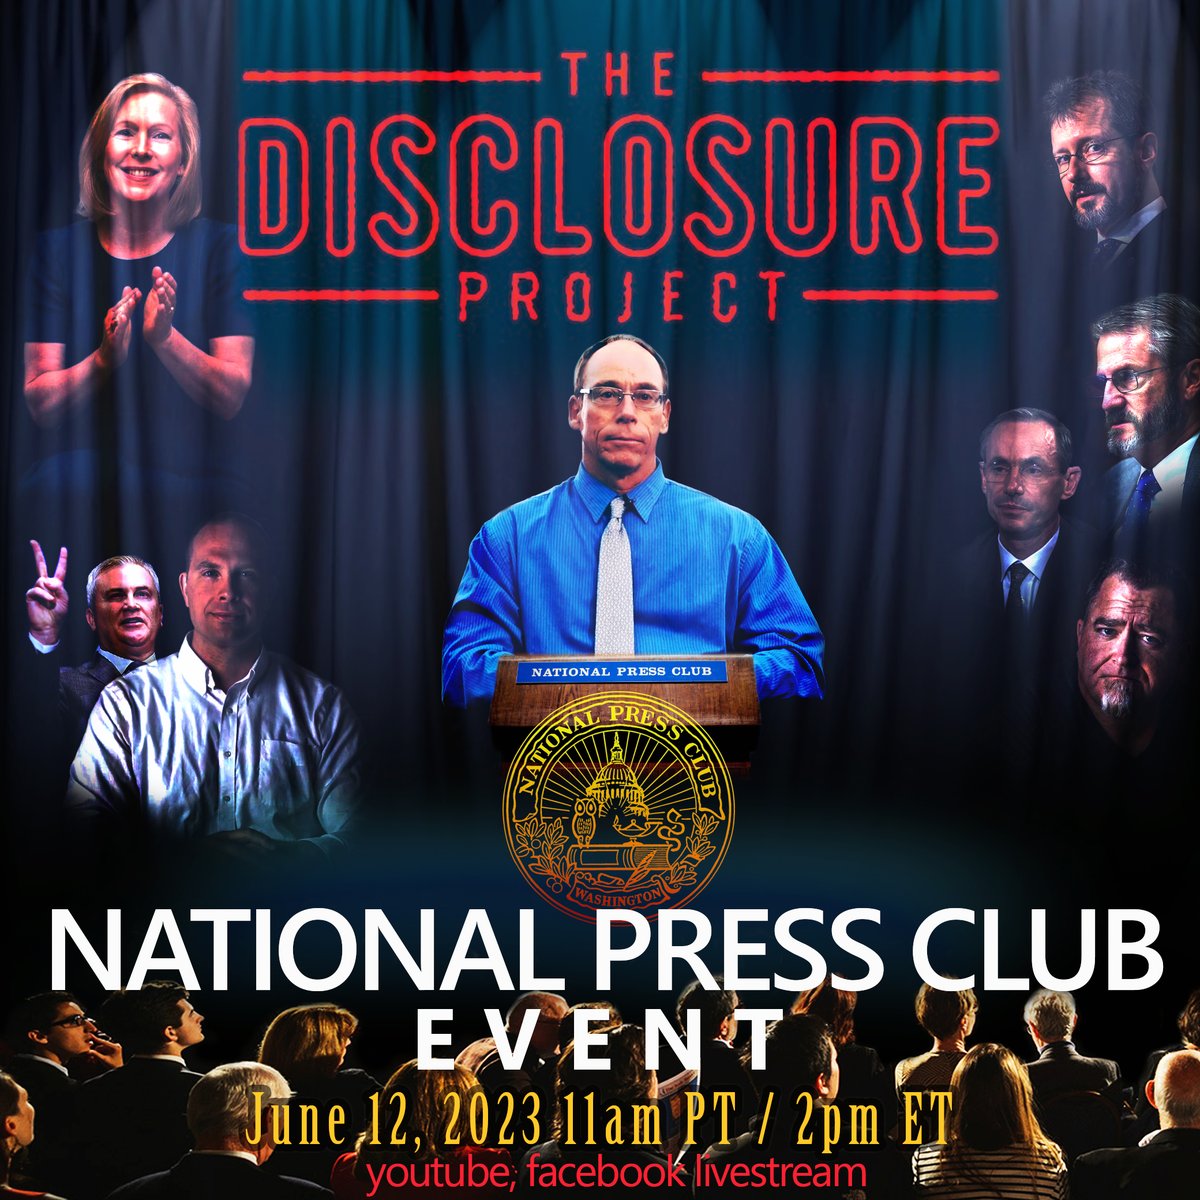 Make sure to tune into the historic National Press Club Event by Dr. Steven Greer and the Disclosure Project
June 12, 2023 11am PT / 2pm ET
#ufotwitter #uaptwitter #DavidGrusch #Grusch #NewsNation #Greer #ufodisclosurenow #nationalpressclub #ufo #uap #aliens #roswell #disclosure